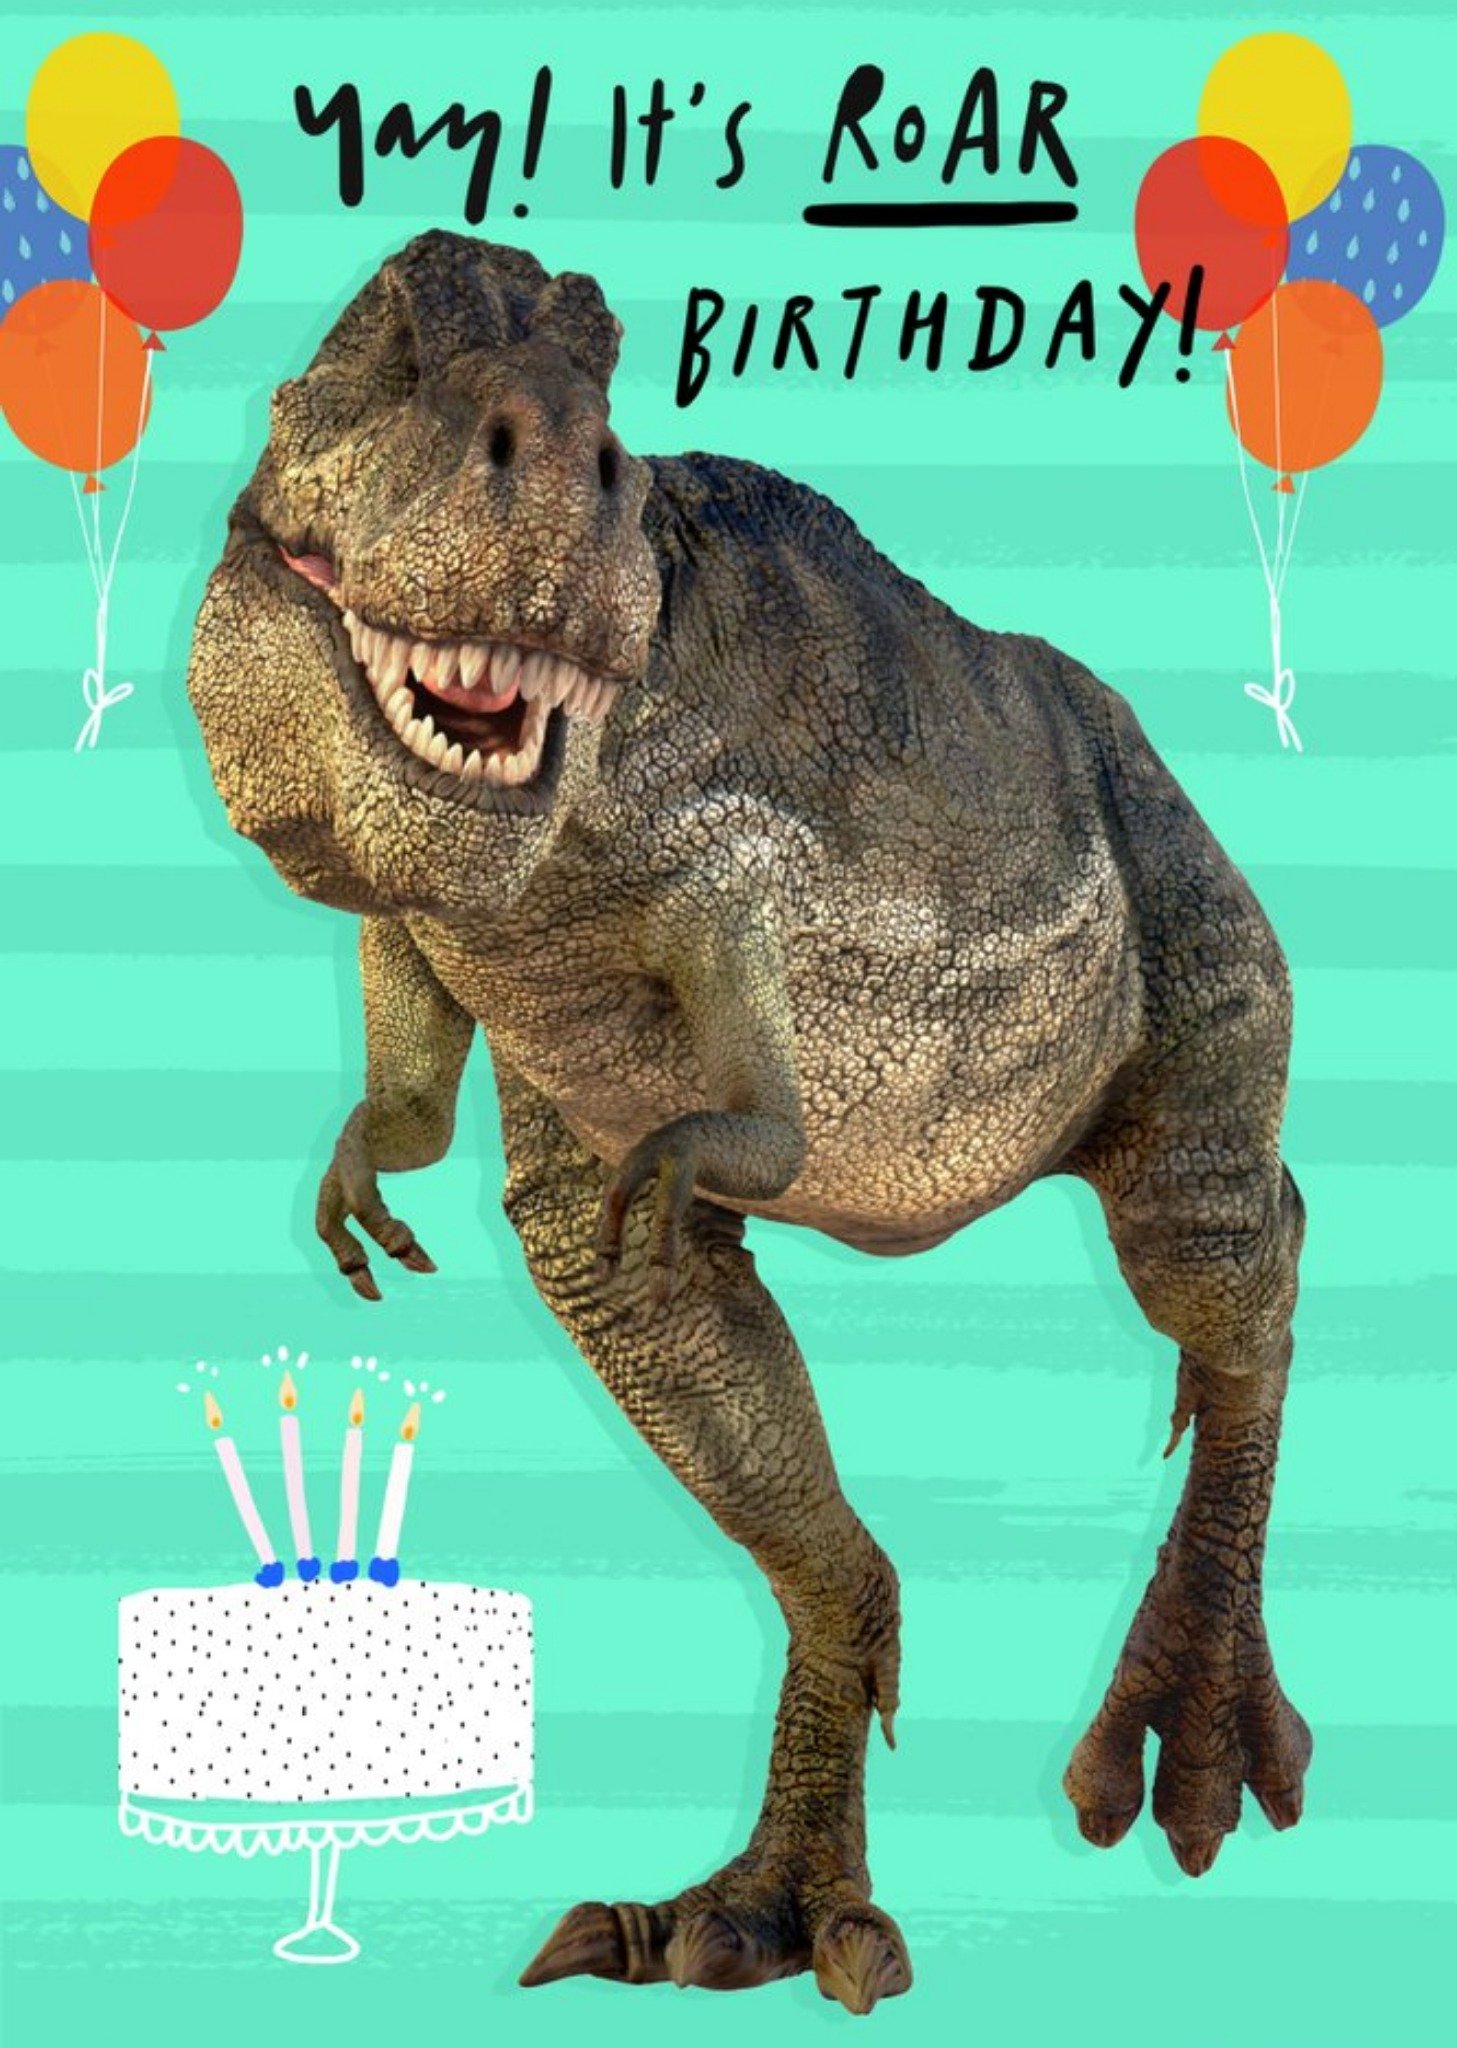 The Natural History Museum Its Roar Birthday Dinosaur Card, Large